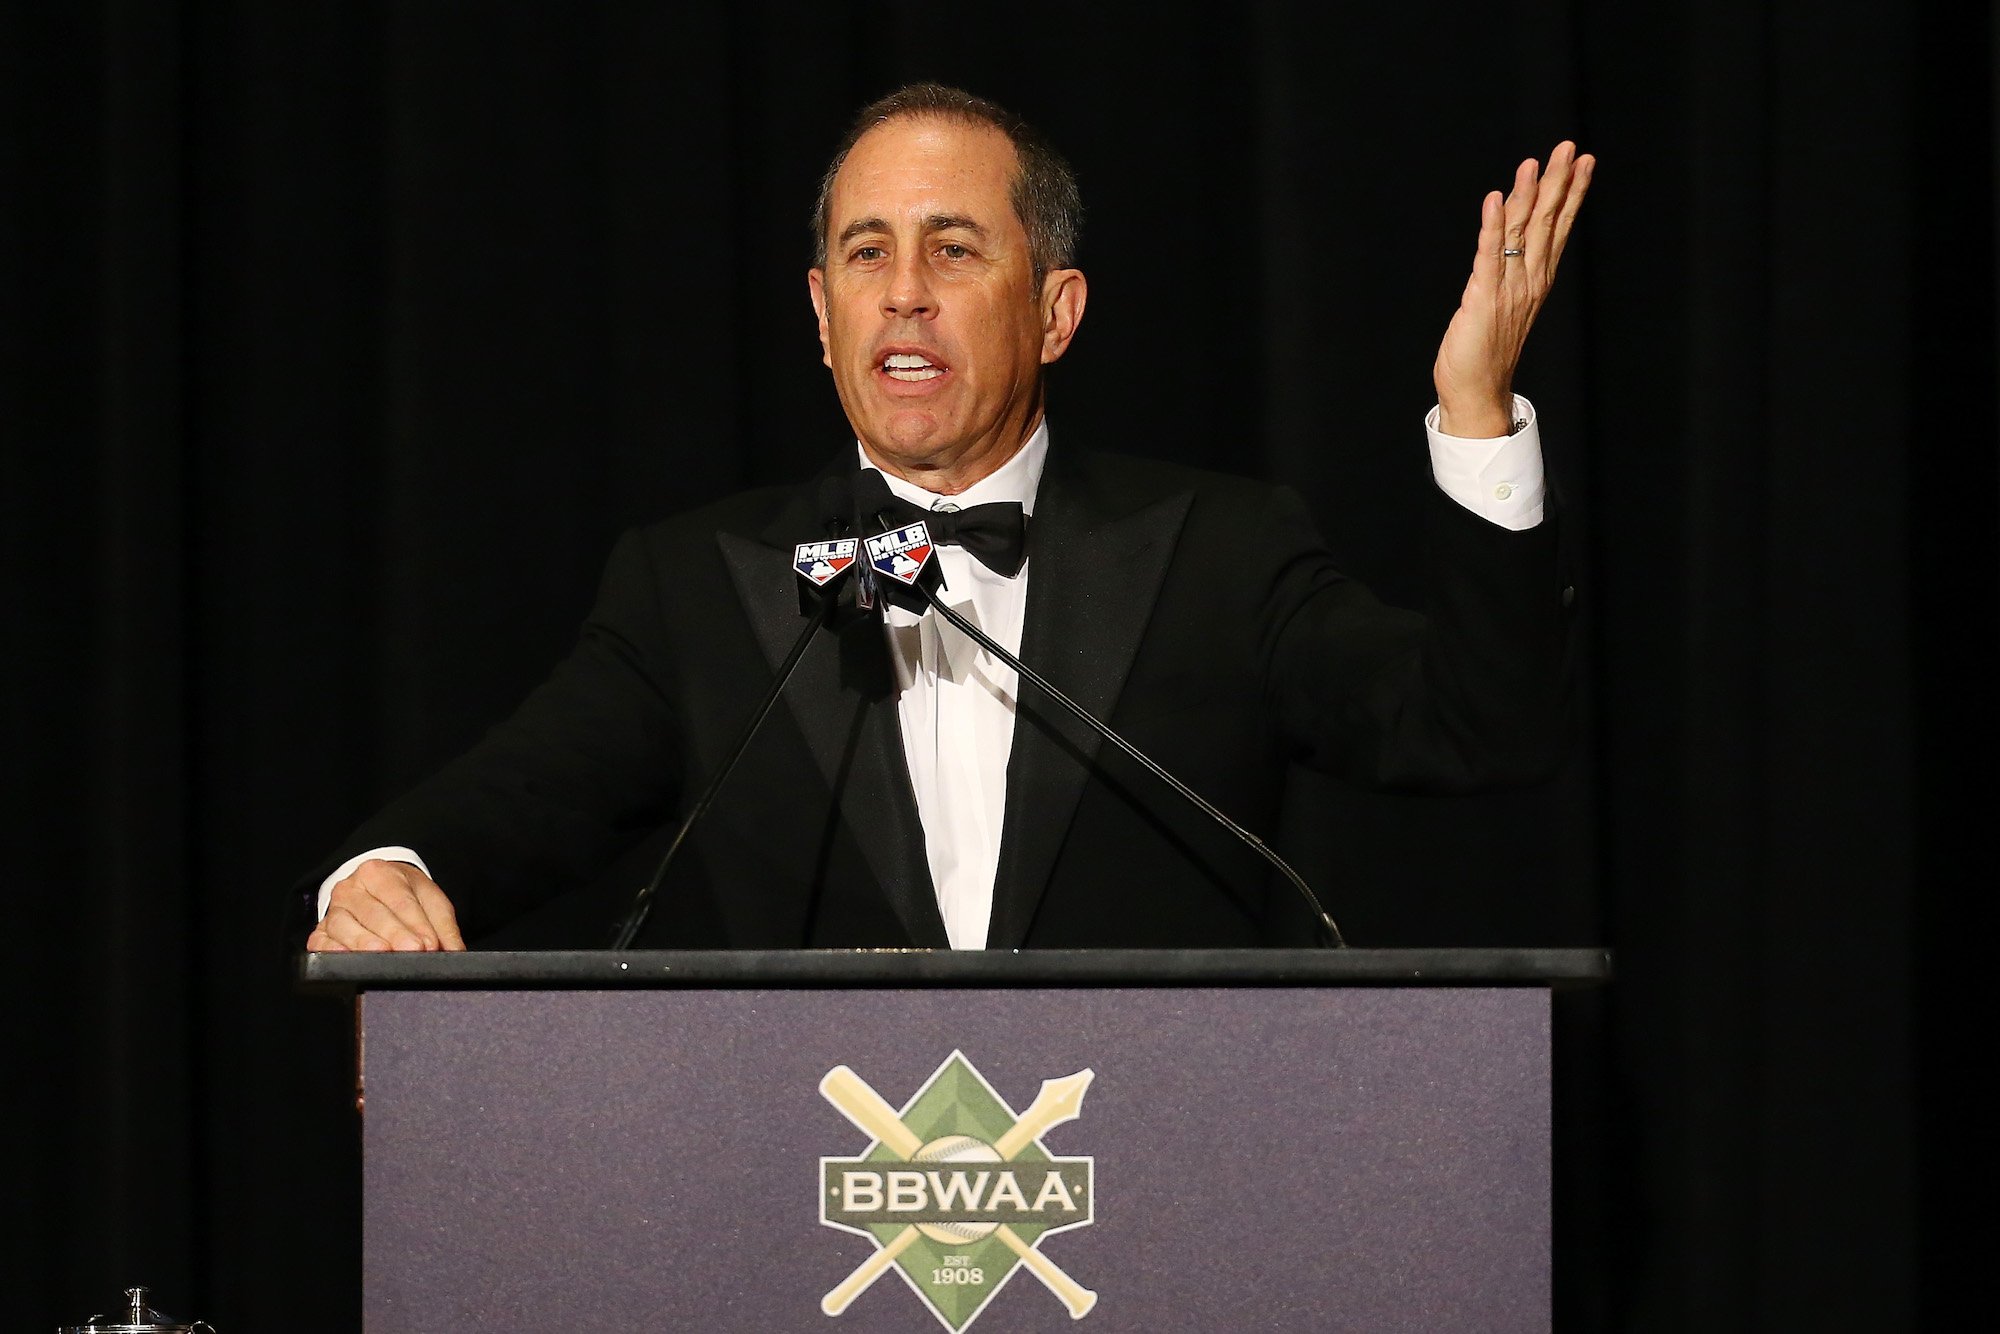 Jerry Seinfeld Is Returning to TV, But It Almost Didn’t Even Happen